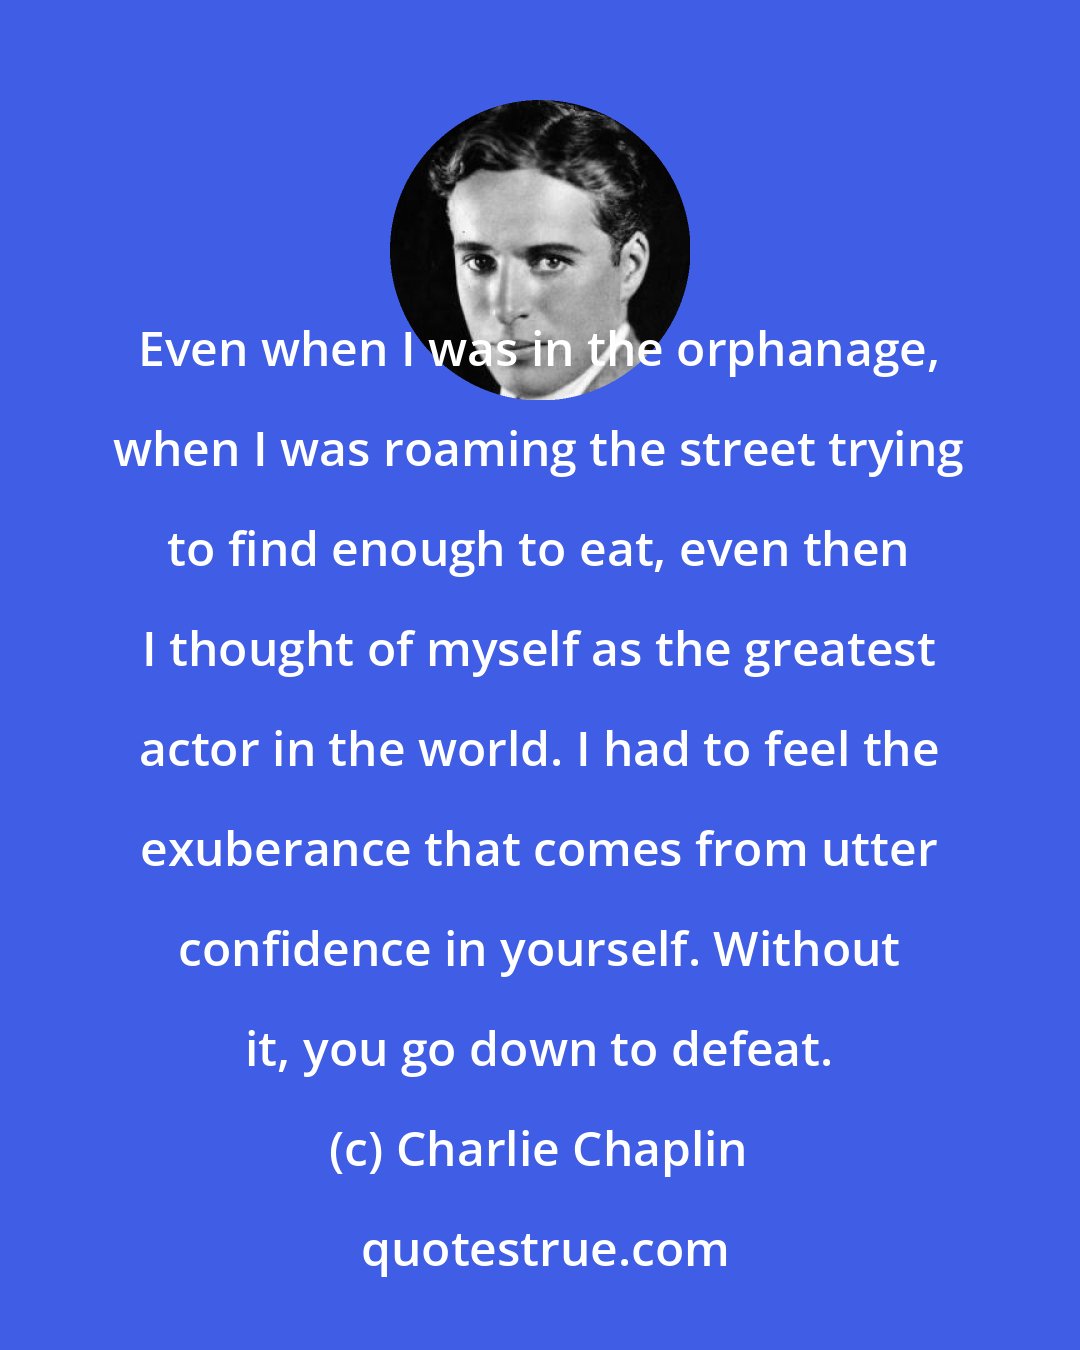 Charlie Chaplin: Even when I was in the orphanage, when I was roaming the street trying to find enough to eat, even then I thought of myself as the greatest actor in the world. I had to feel the exuberance that comes from utter confidence in yourself. Without it, you go down to defeat.